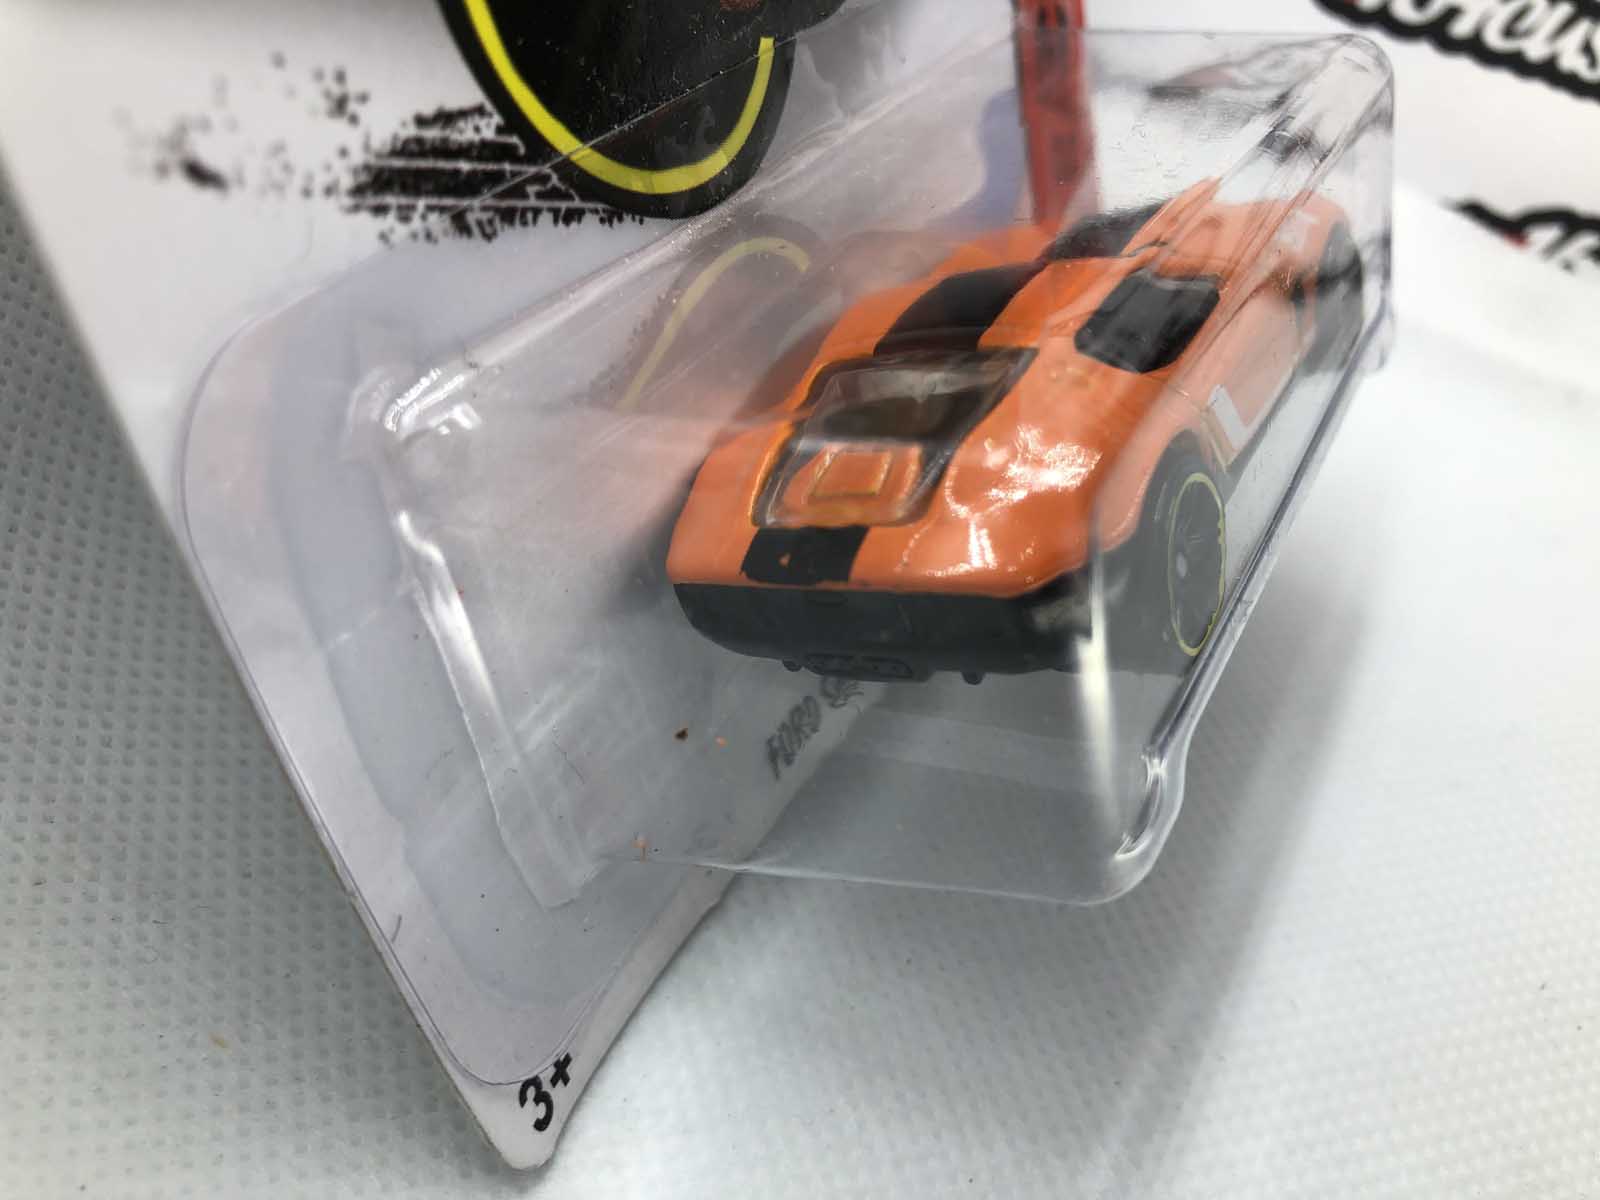 Ford Shelby GR-1 Concept Hot Wheels